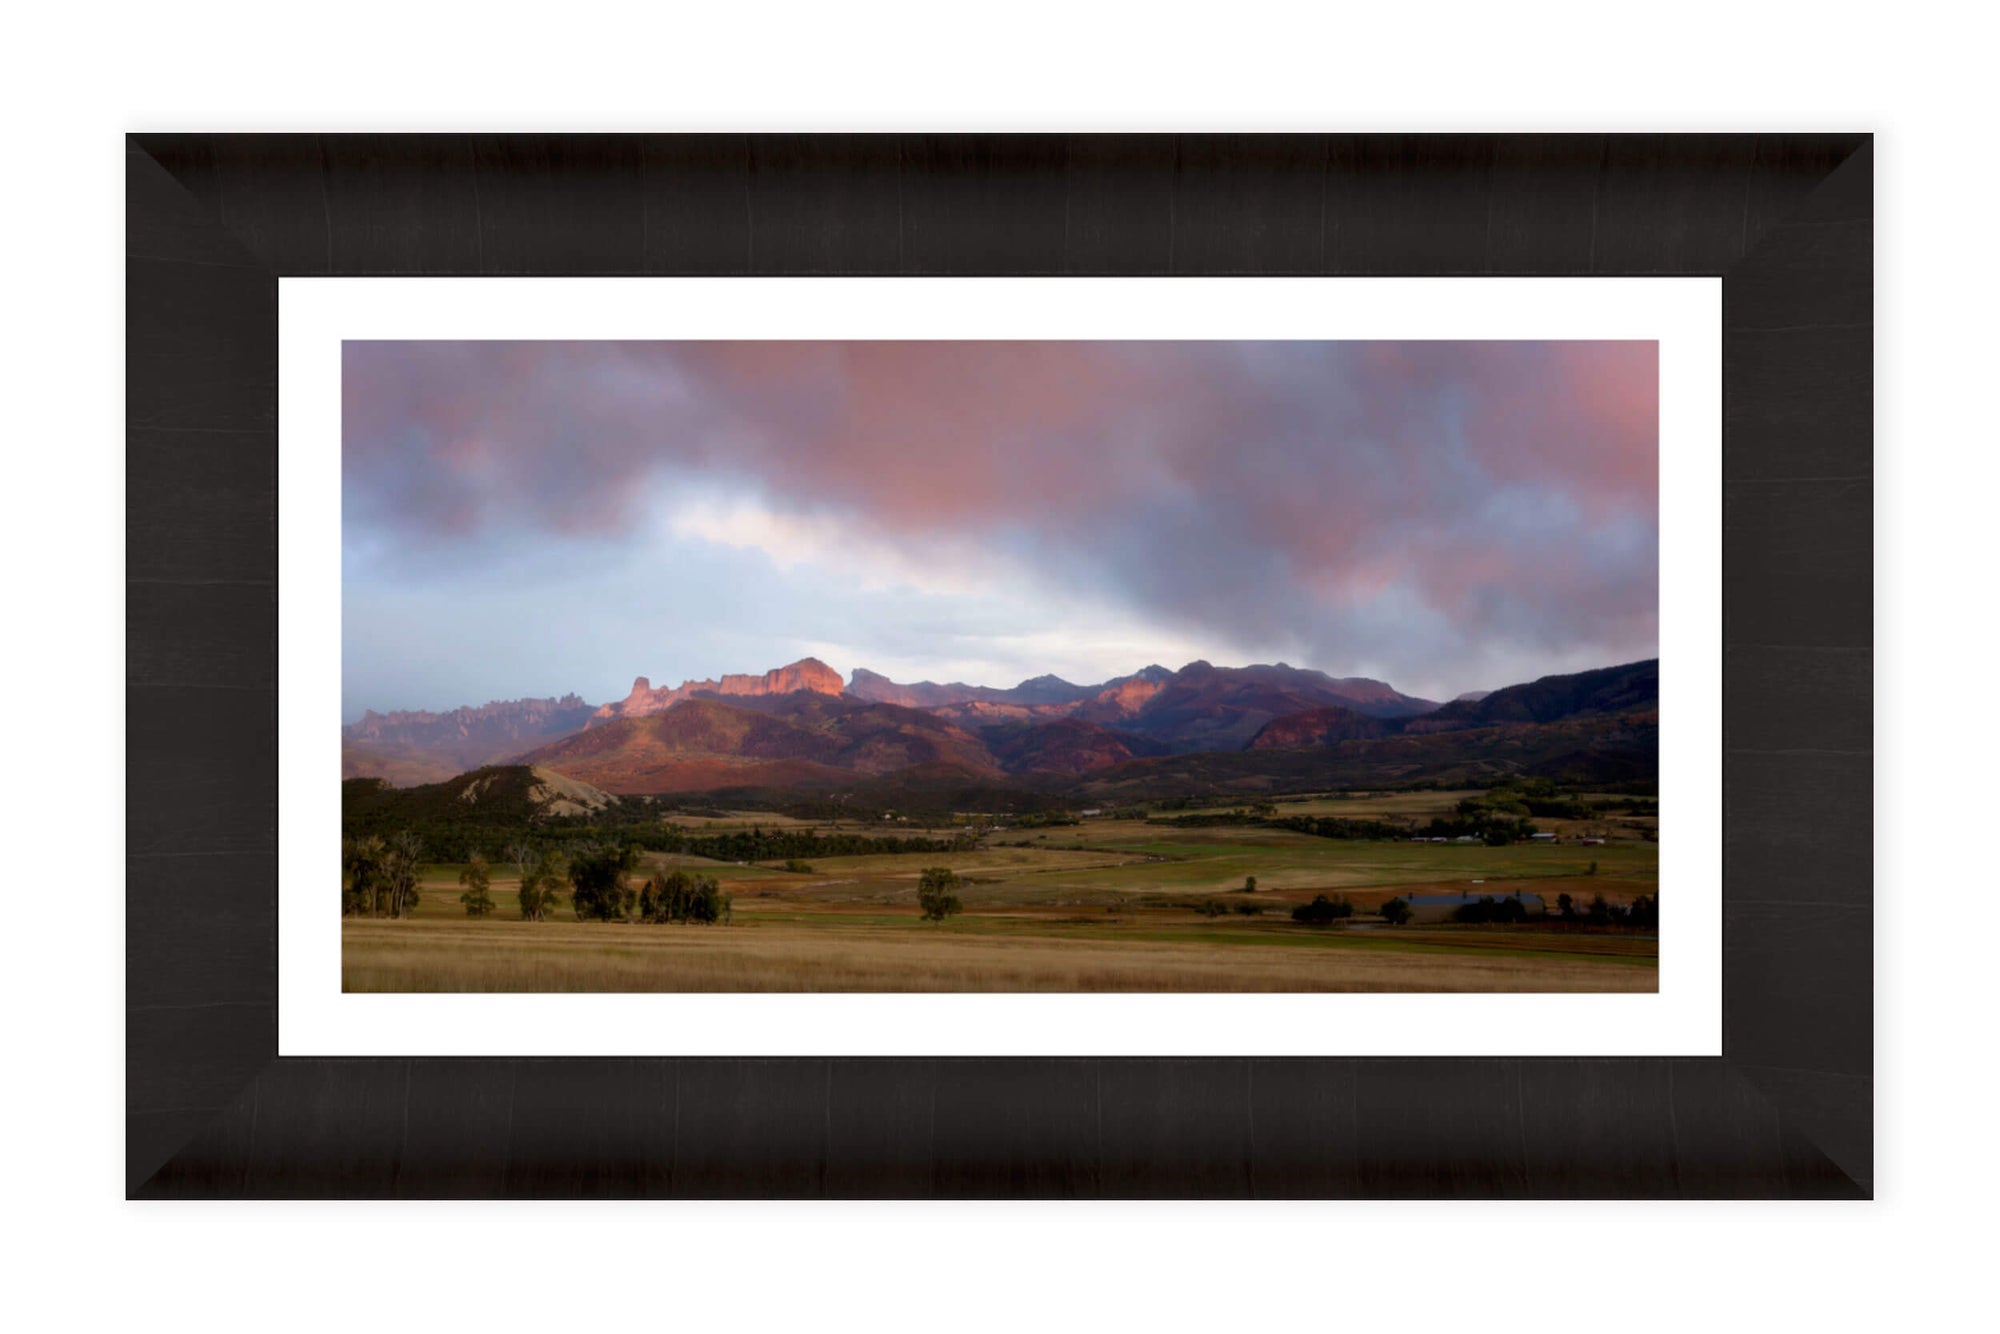 A framed Owl Creek Pass picture at sunset in Ridgway, Colorado.